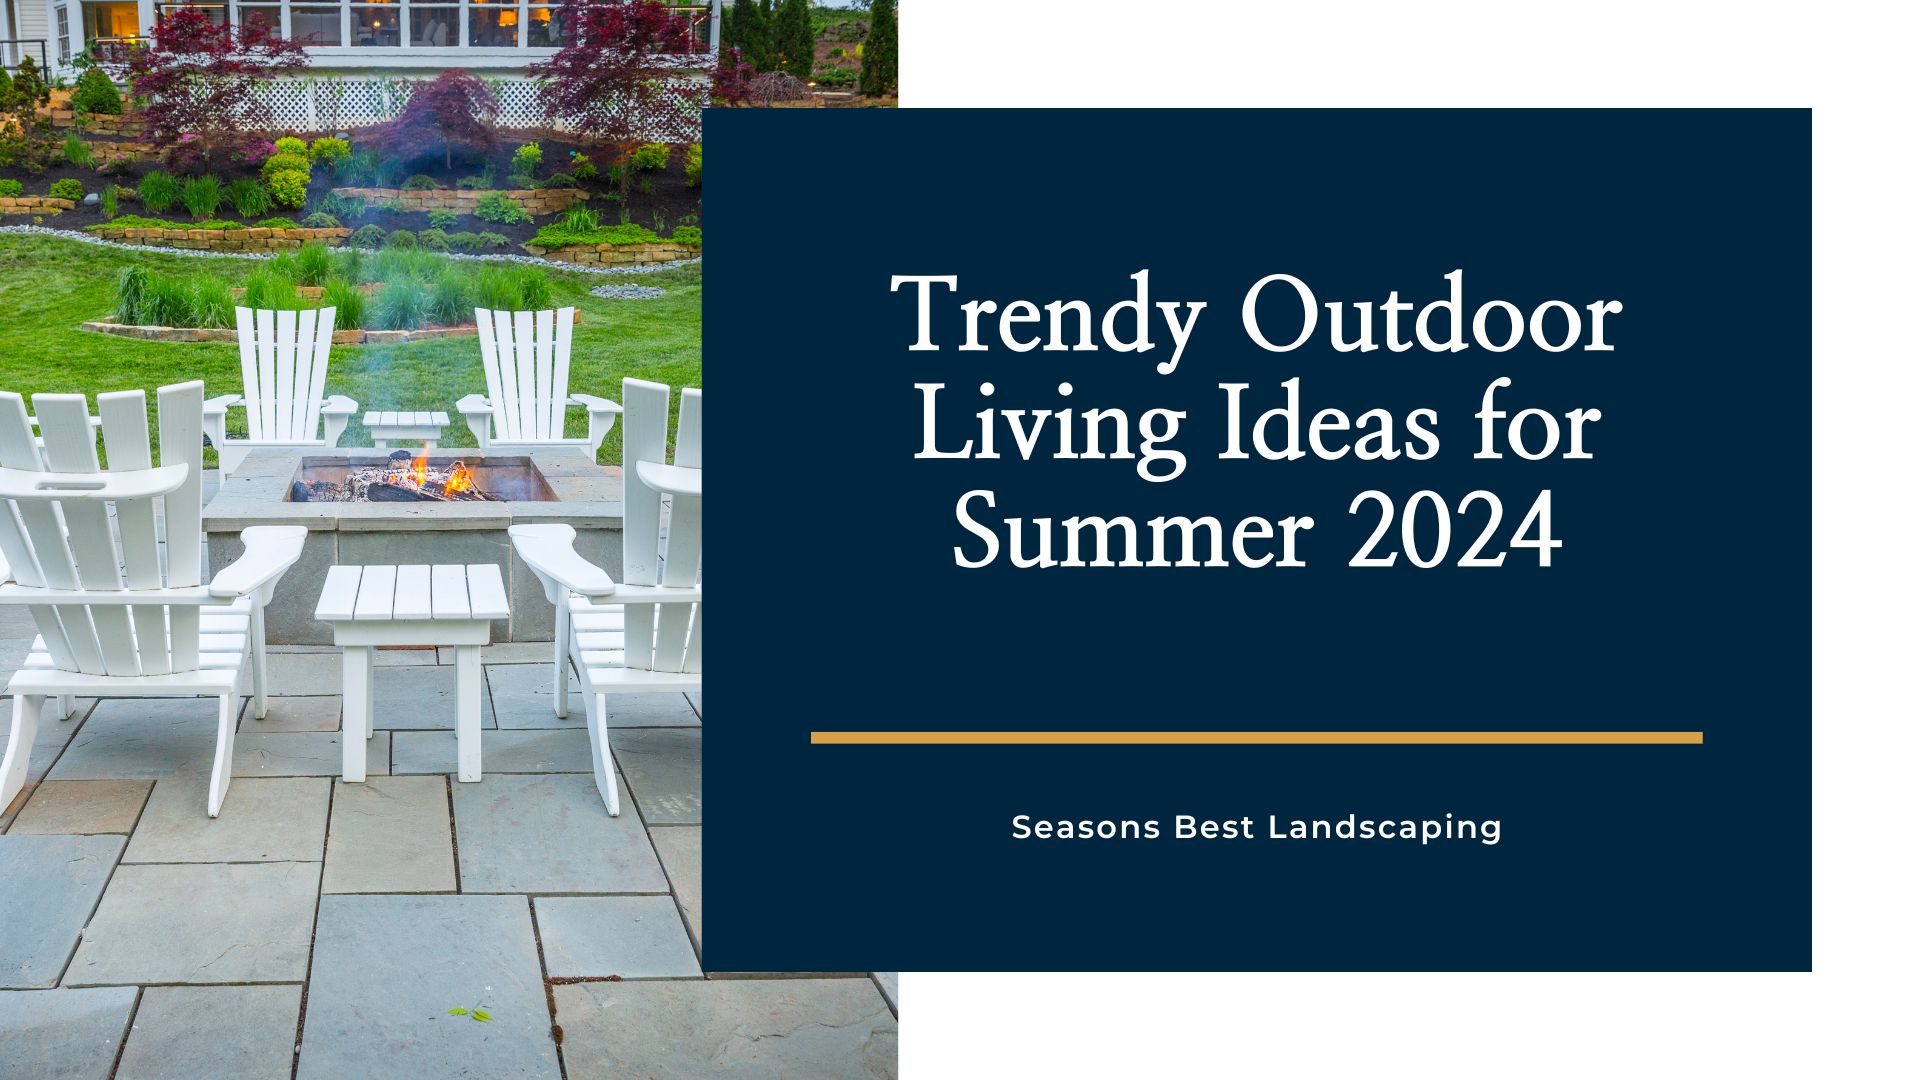 Trendy Outdoor Living Area Ideas for Summer 2024